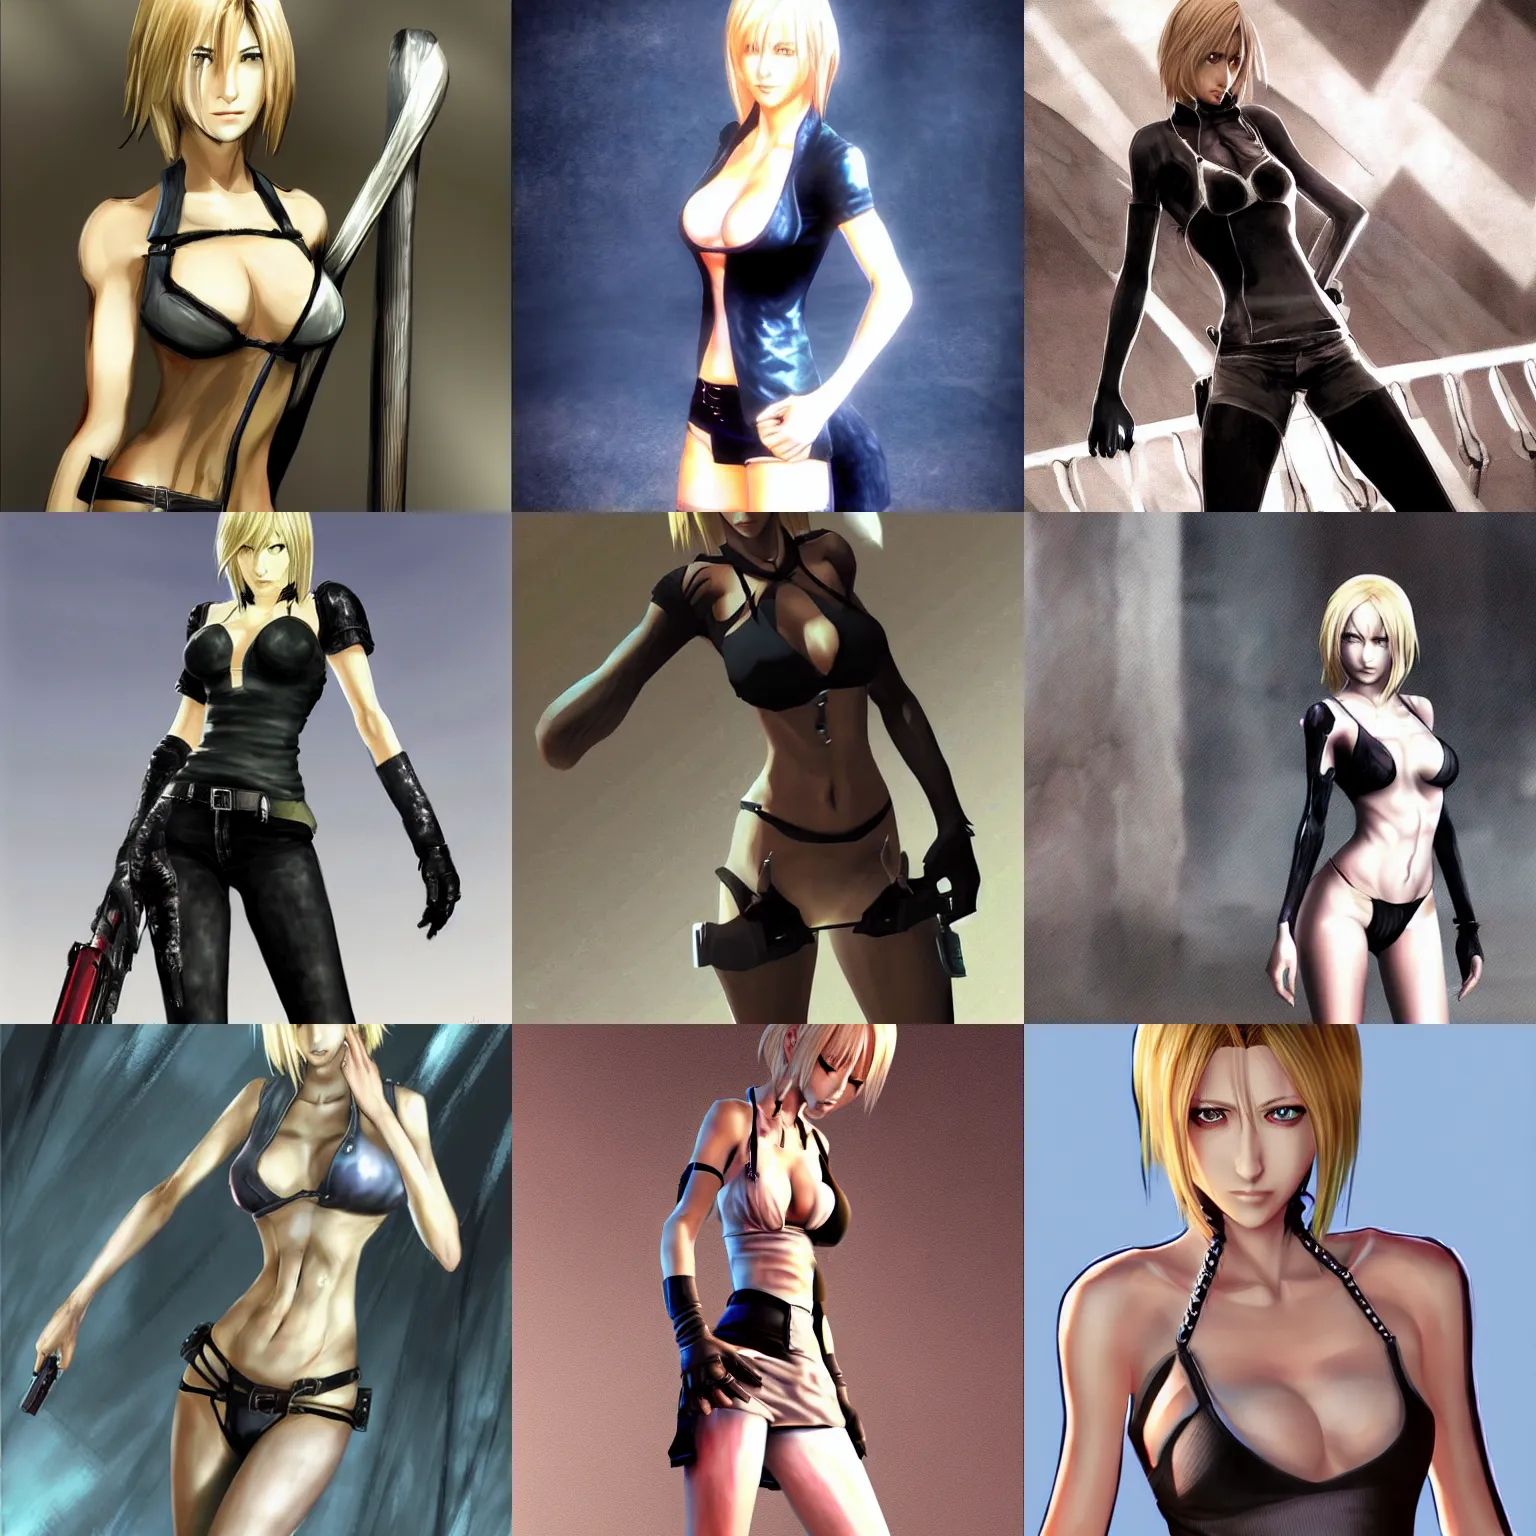 Dryfield, Parasite Eve 2 Remake, Stable Diffusion